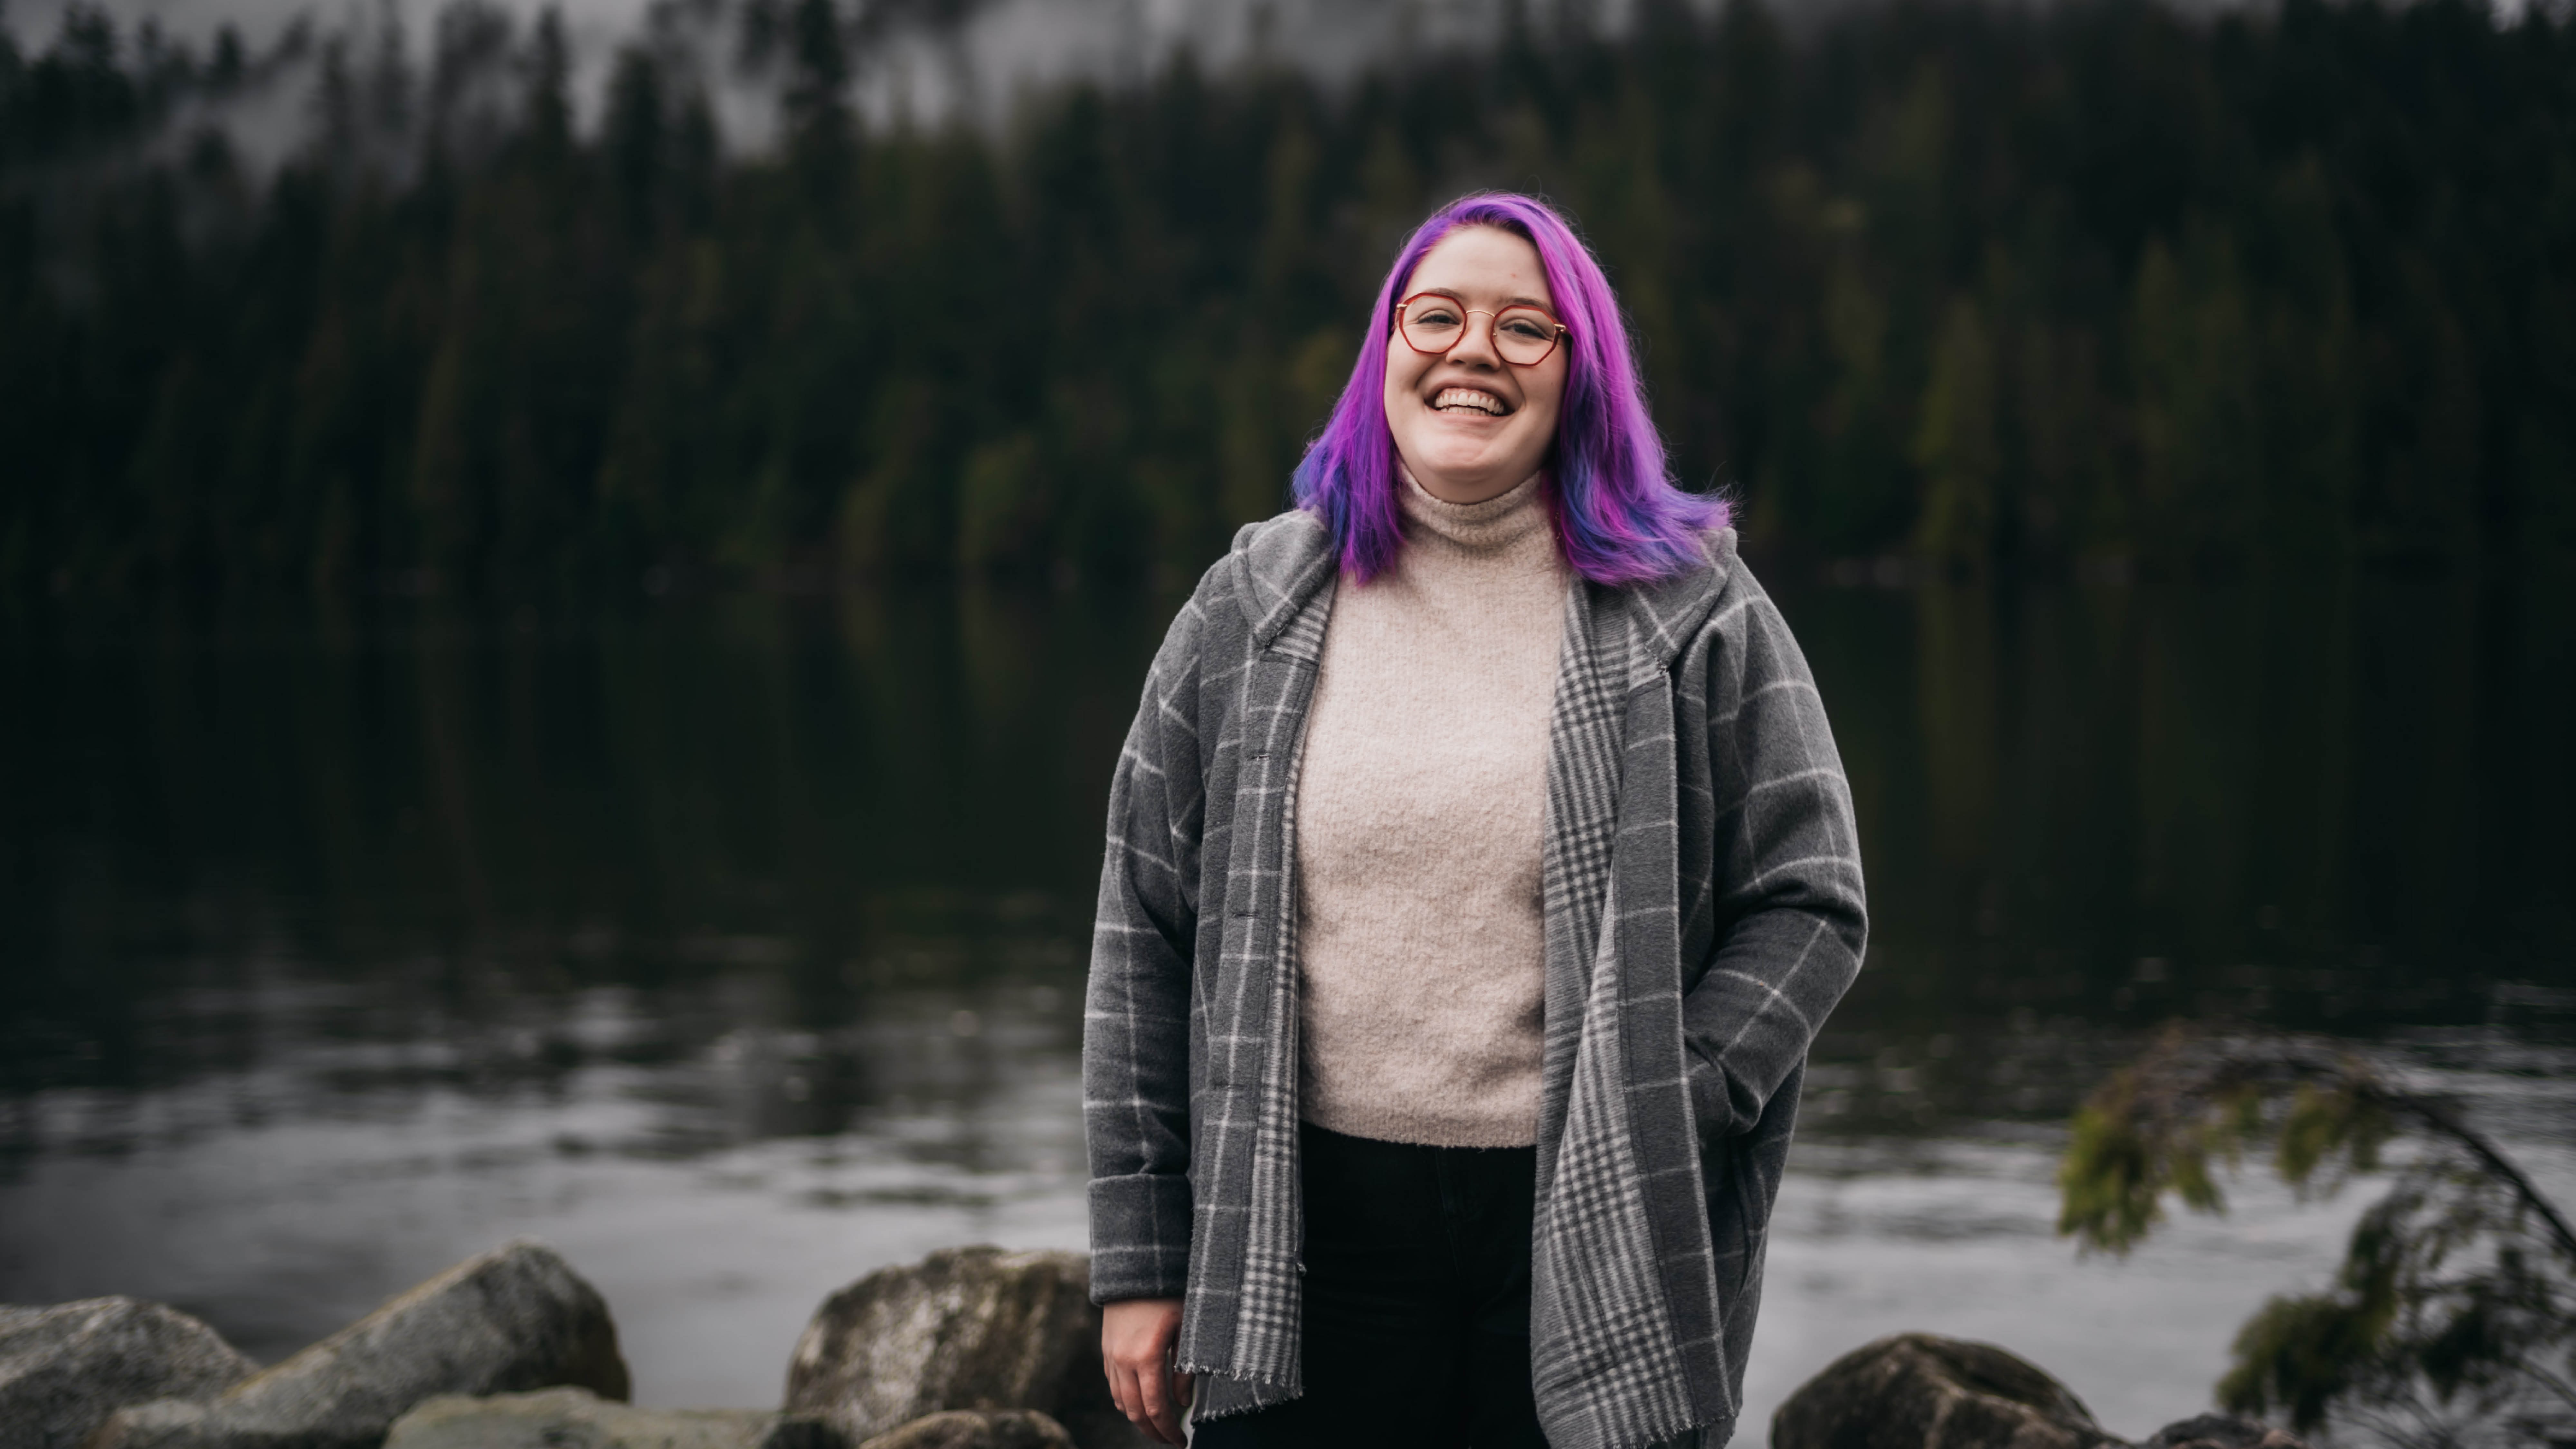 A photo of Caitlyn looking at the camera with a big smile. She is standing in front of large rocks and water. Across the water there is a green forest with clouds of fog dispersed throughout.